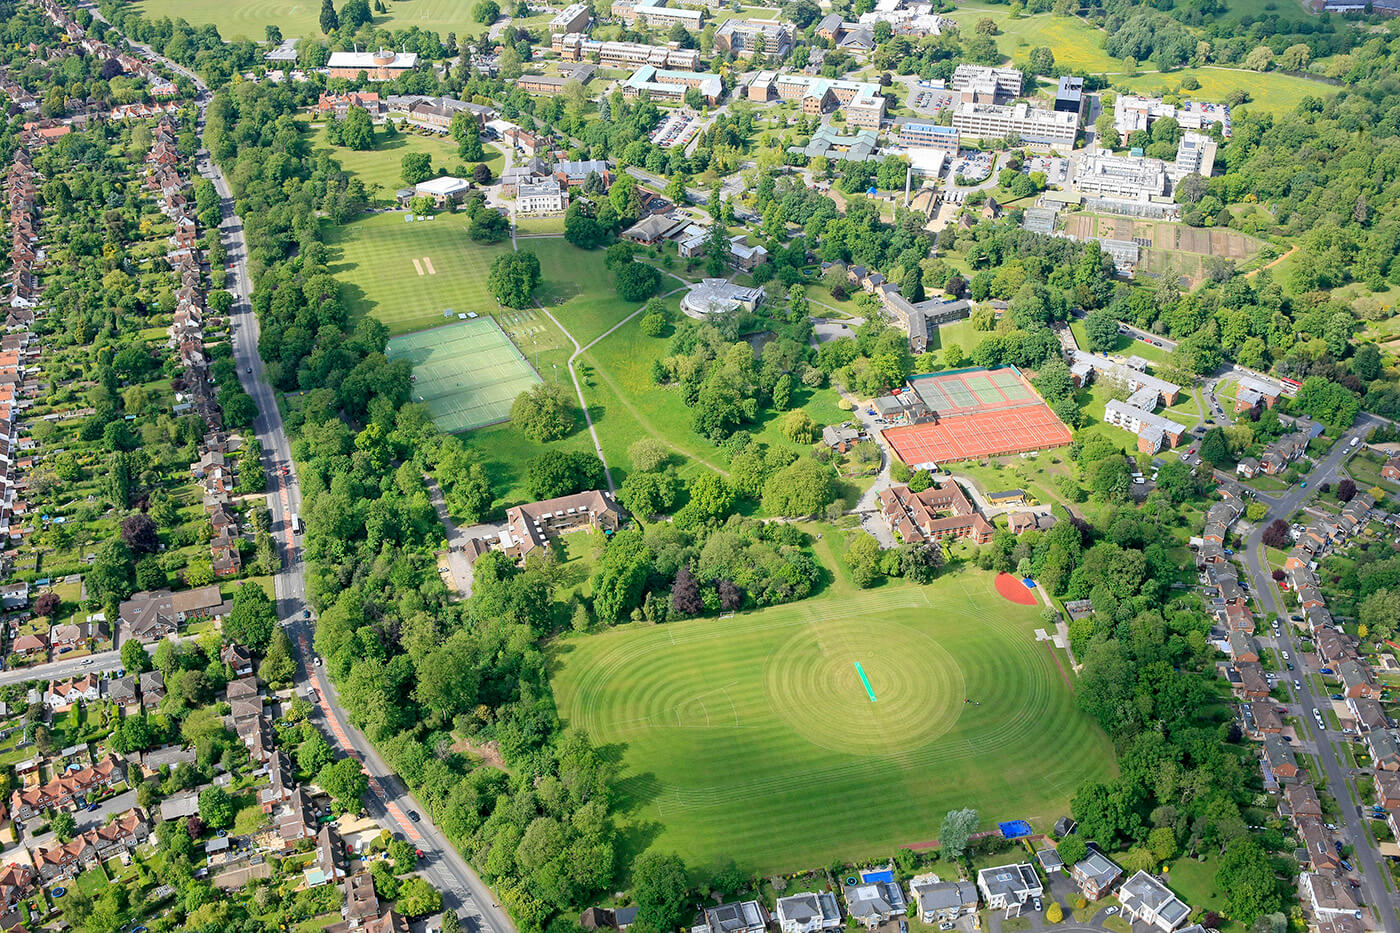 Aerial view from the school and surrounding